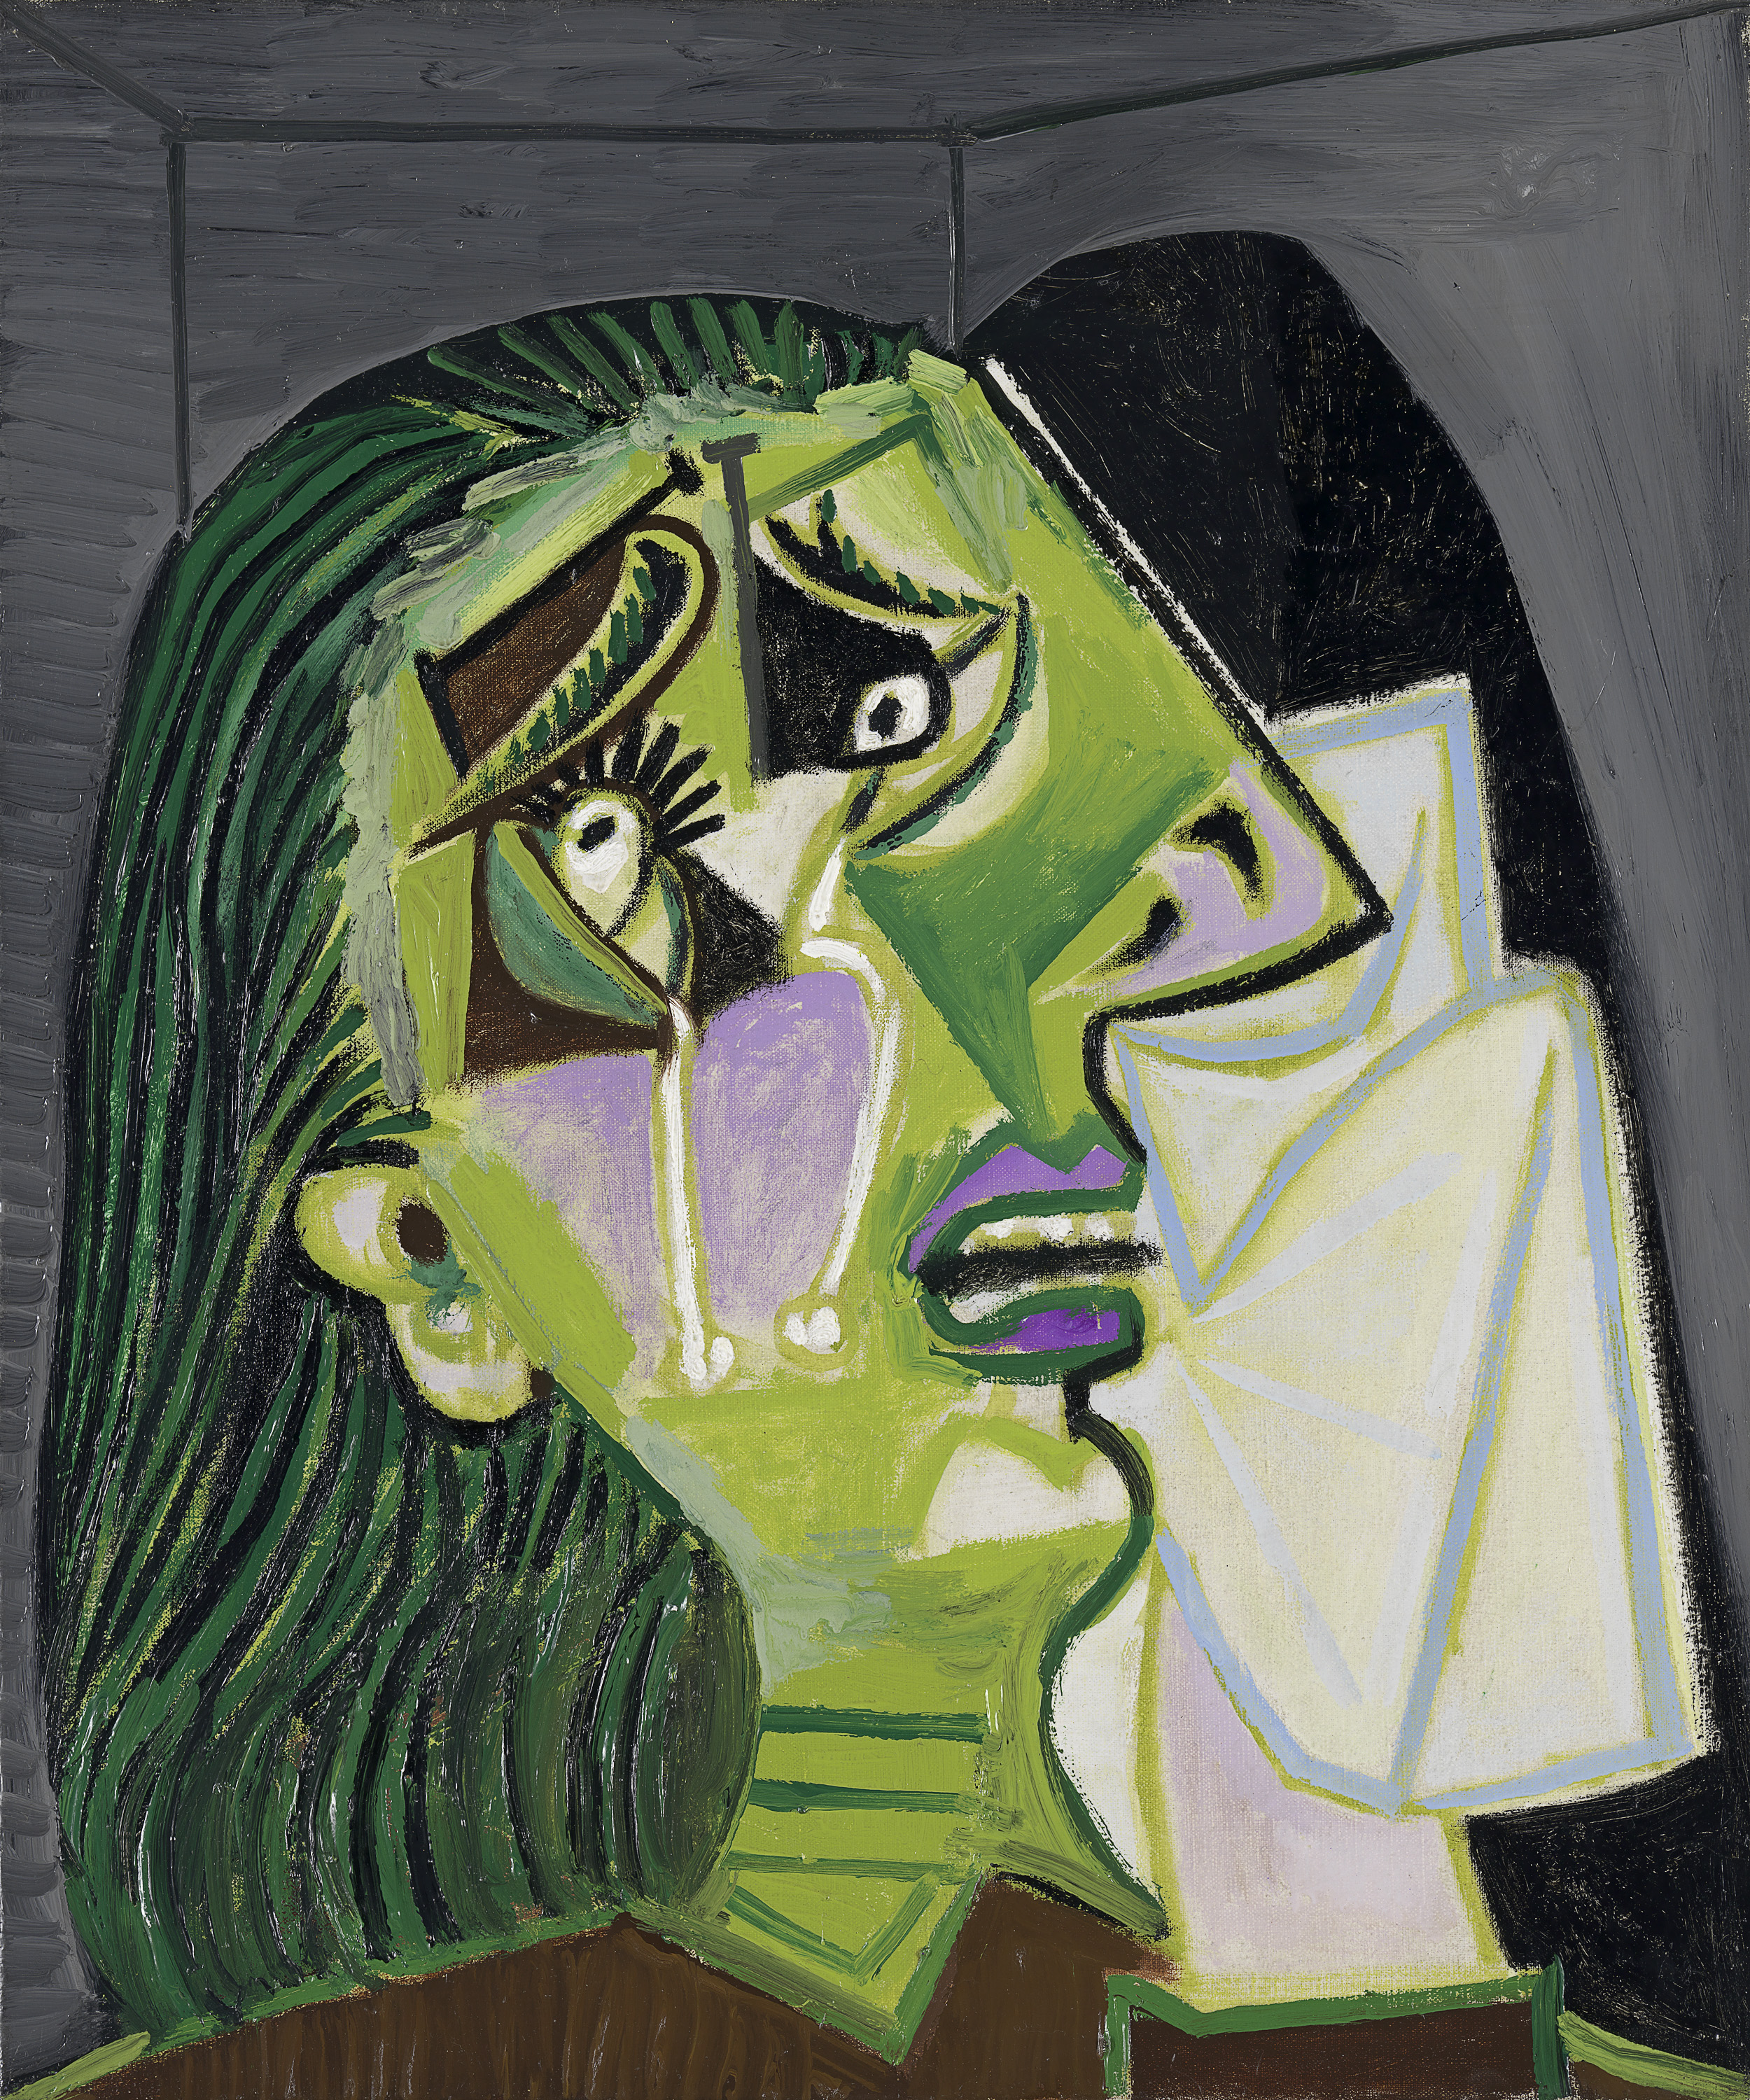 Picasso's Weeping woman